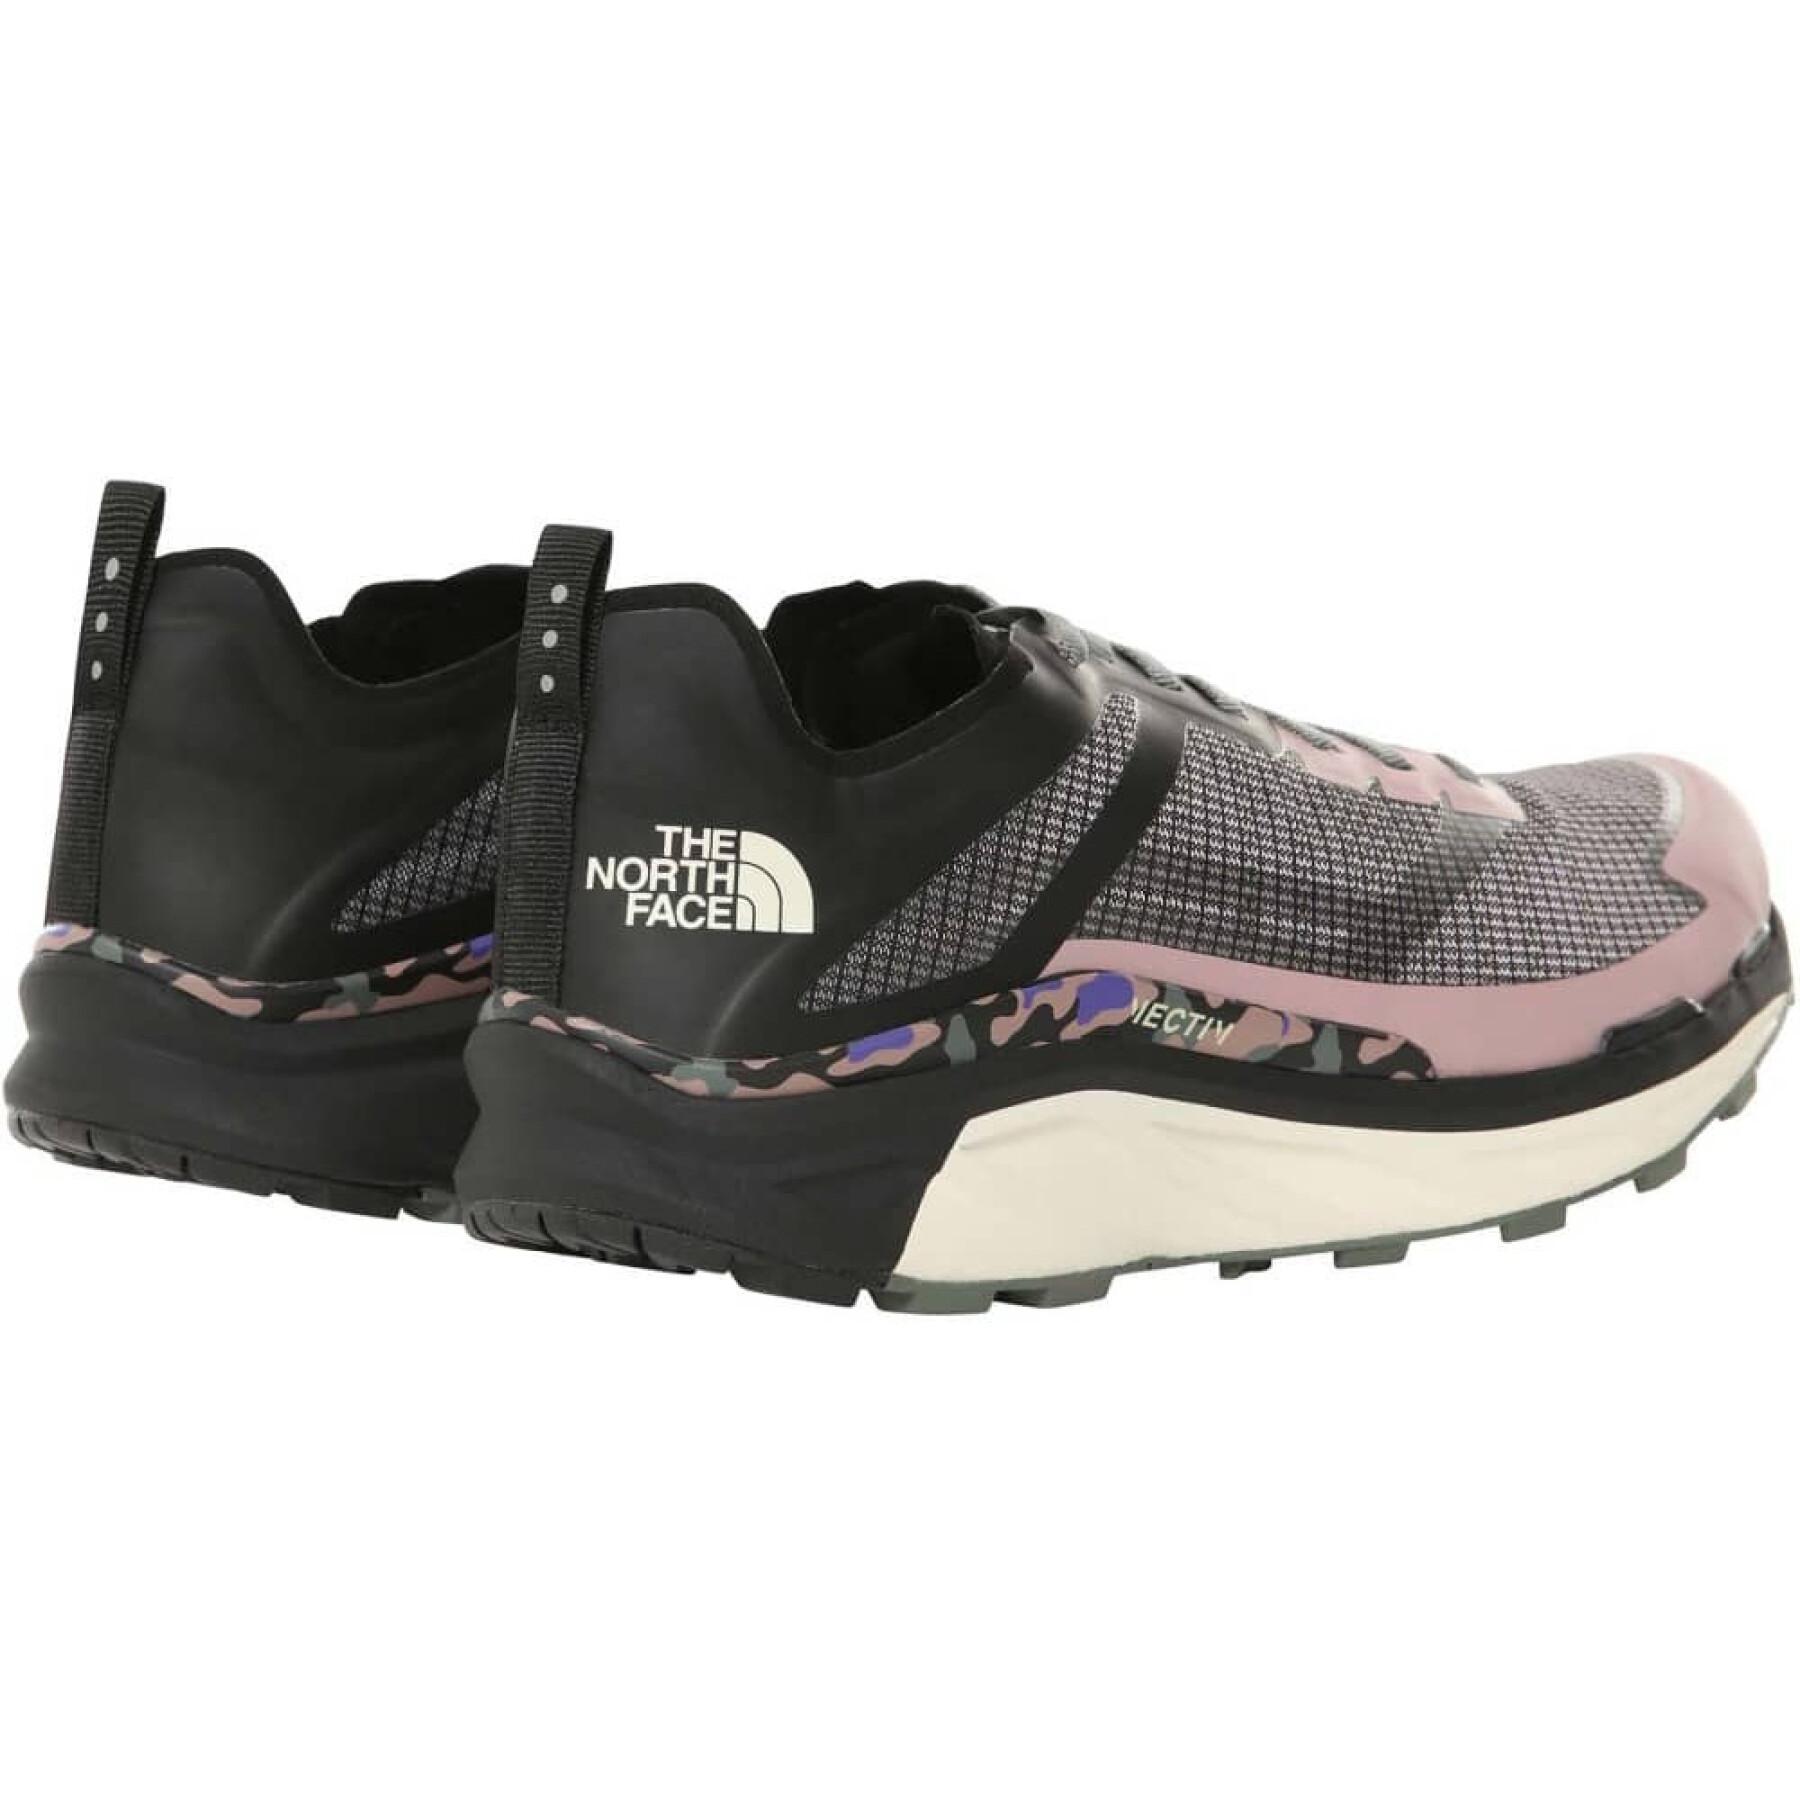 Women's Trail running shoes The North Face Vectiv infinite ltd